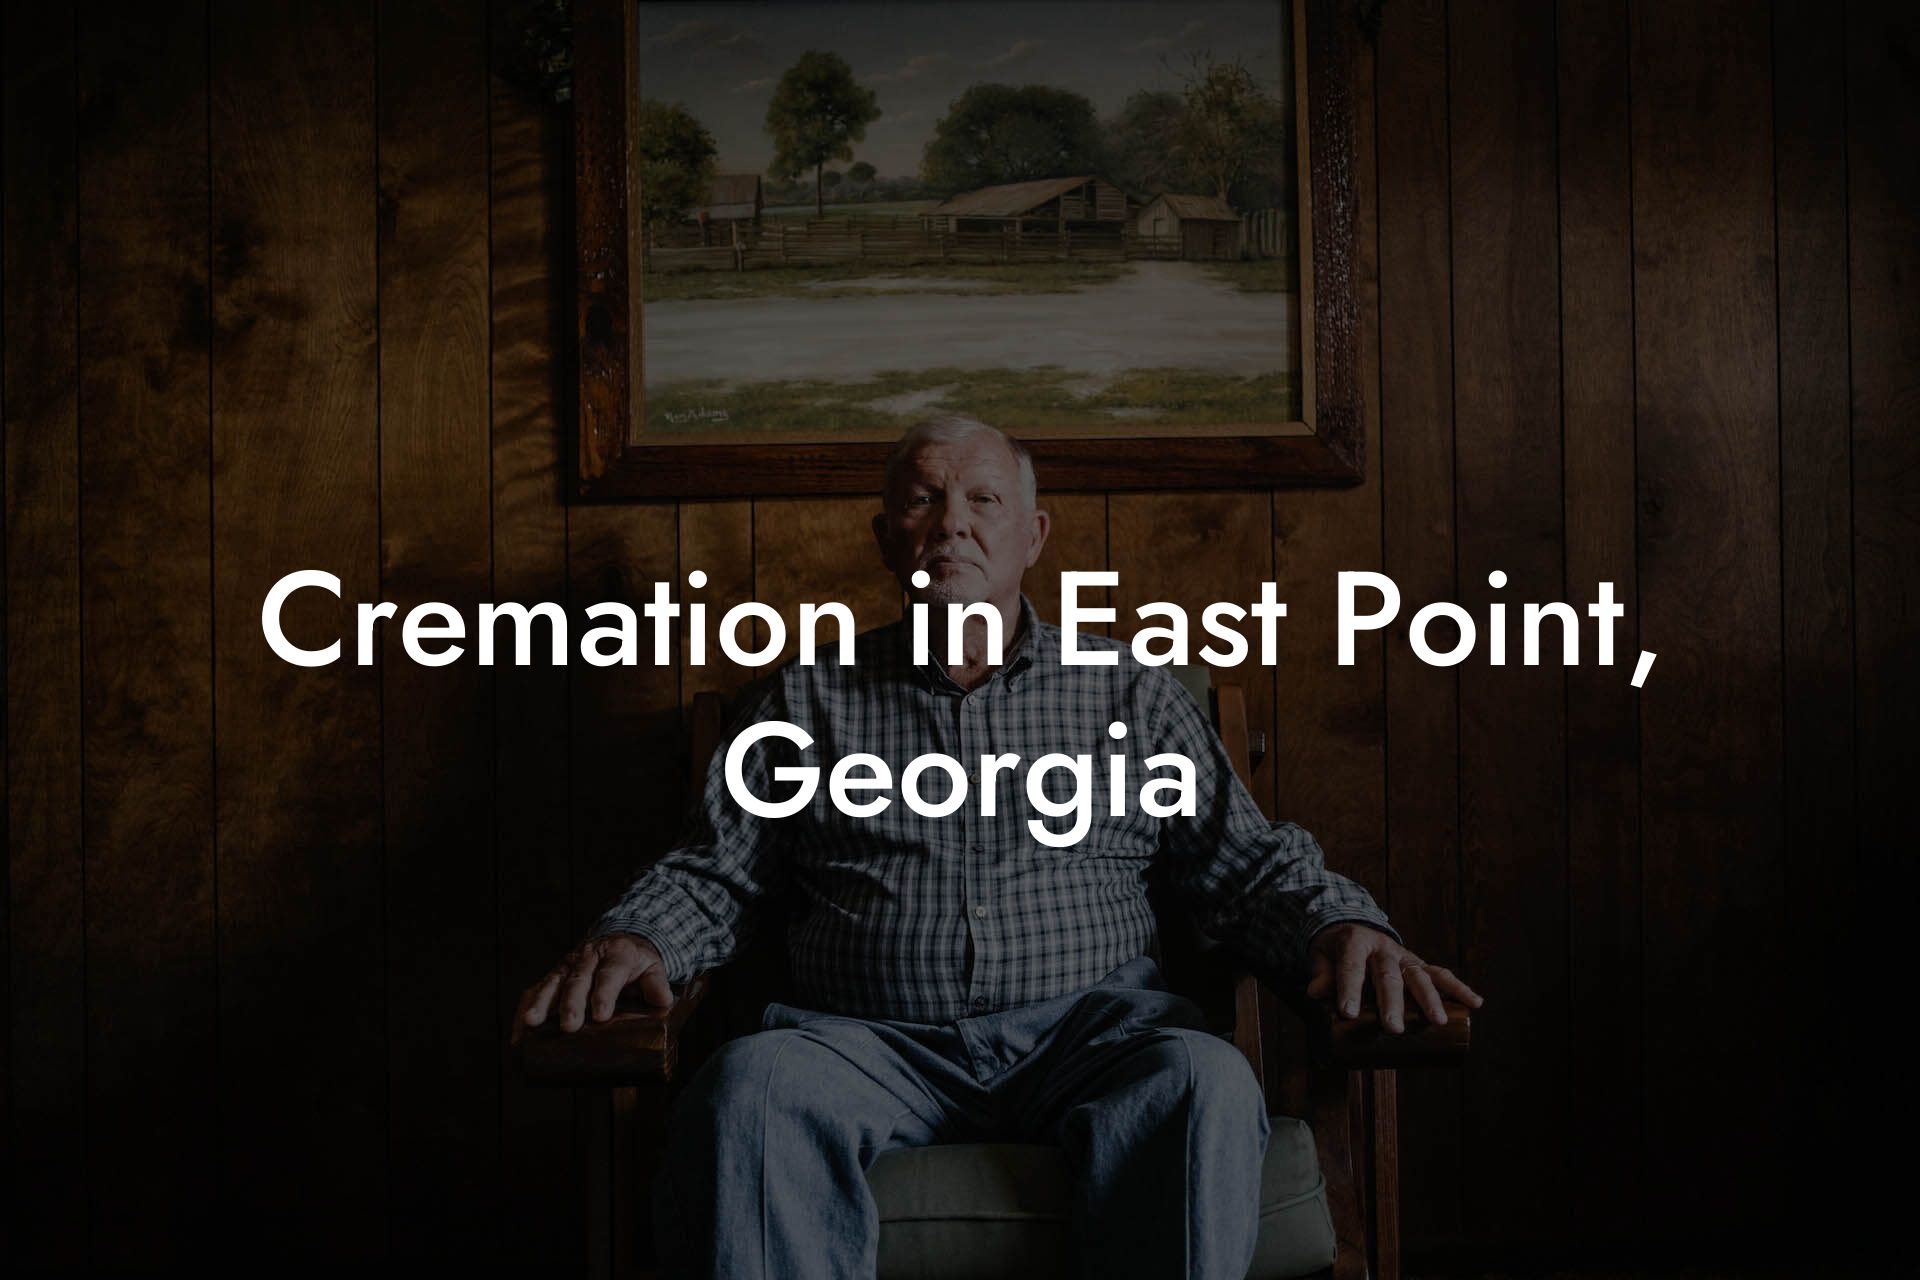 Cremation in East Point, Georgia